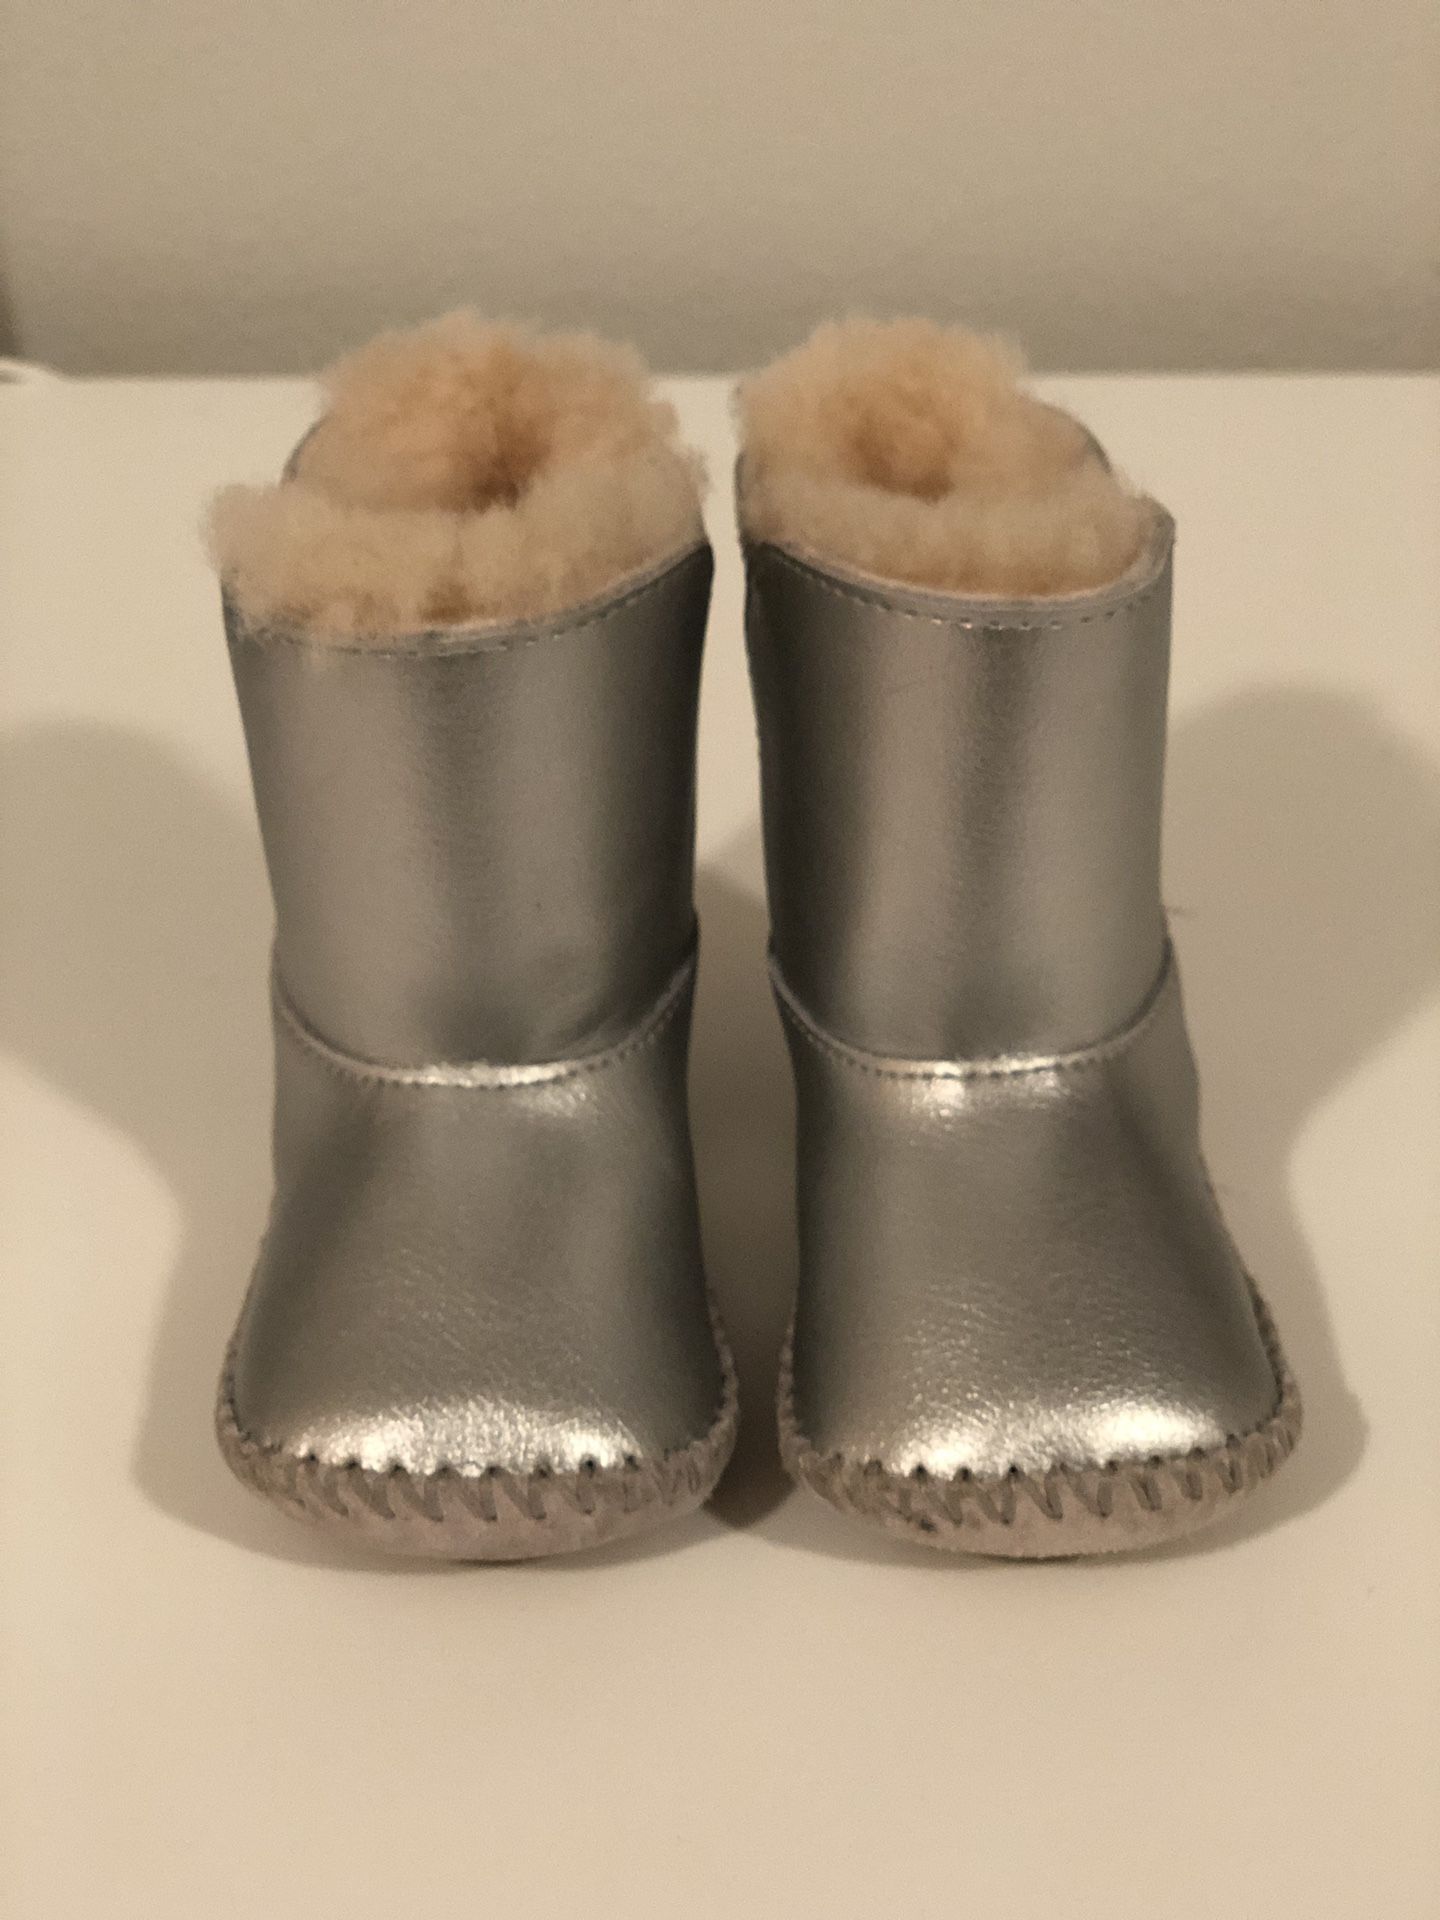 UGG silver fur boots size 12 months SMOKE FREE PET FREE HOME never worn